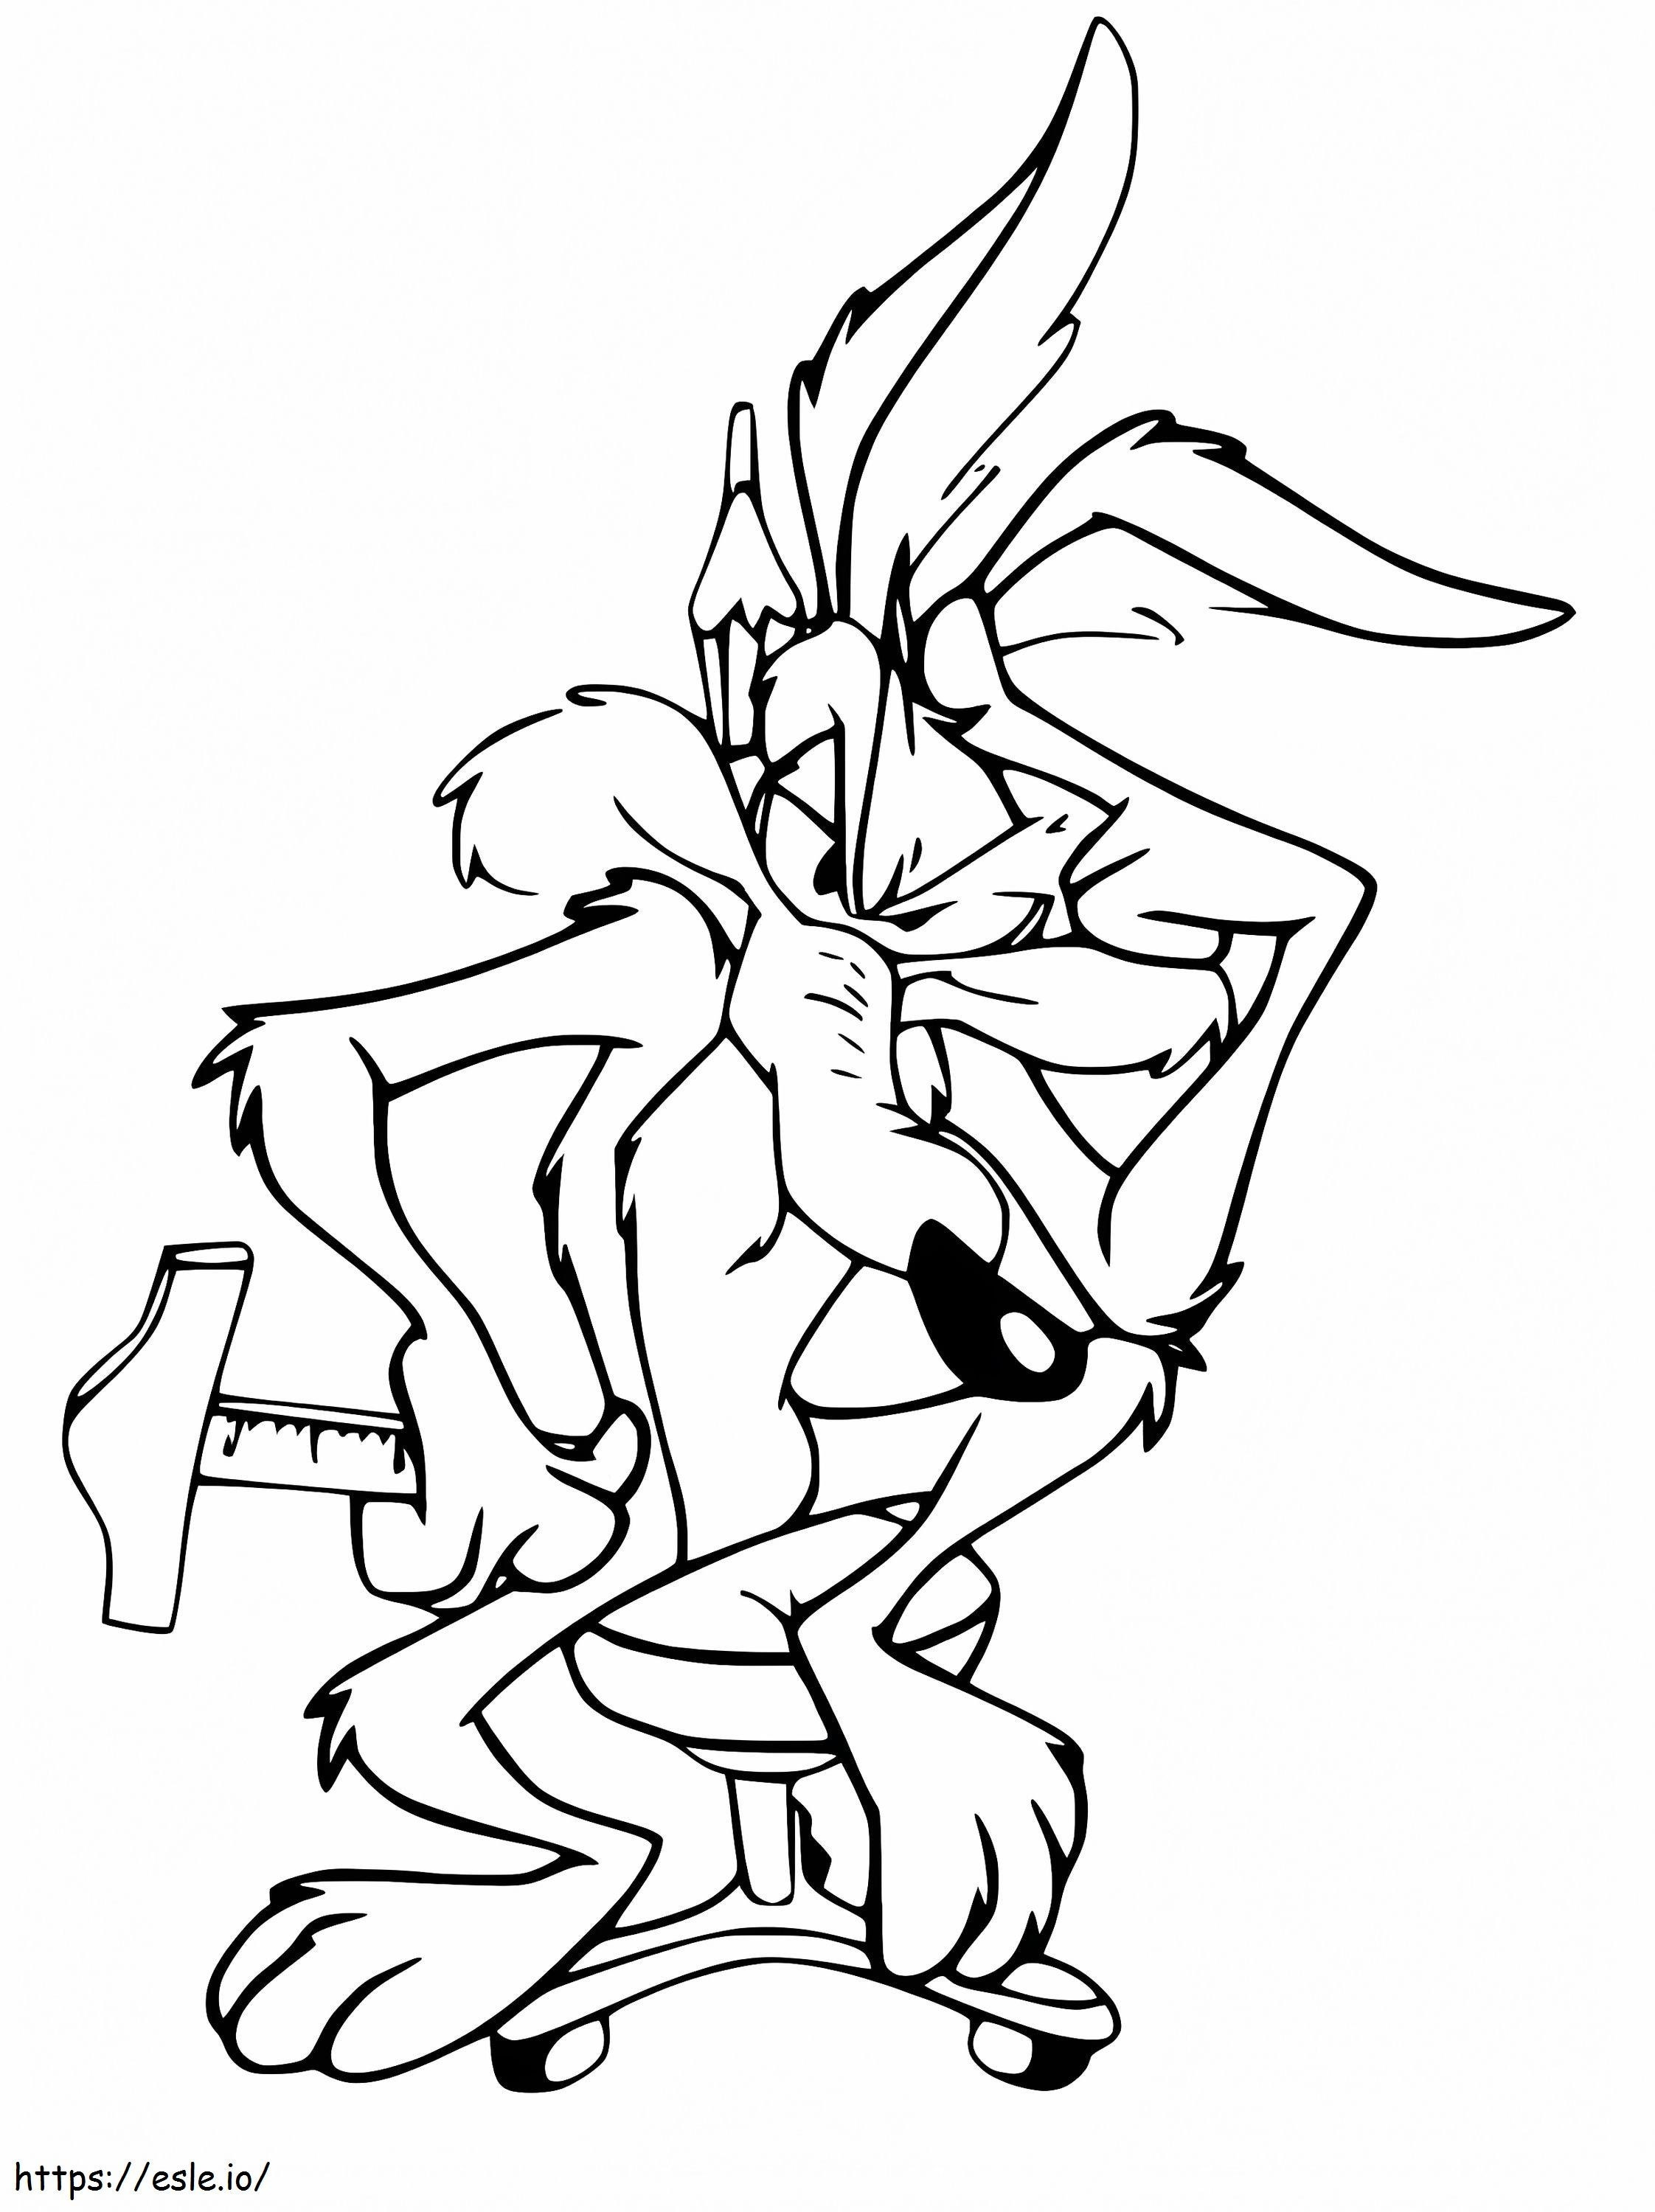 Wile E Coyote Thinking coloring page